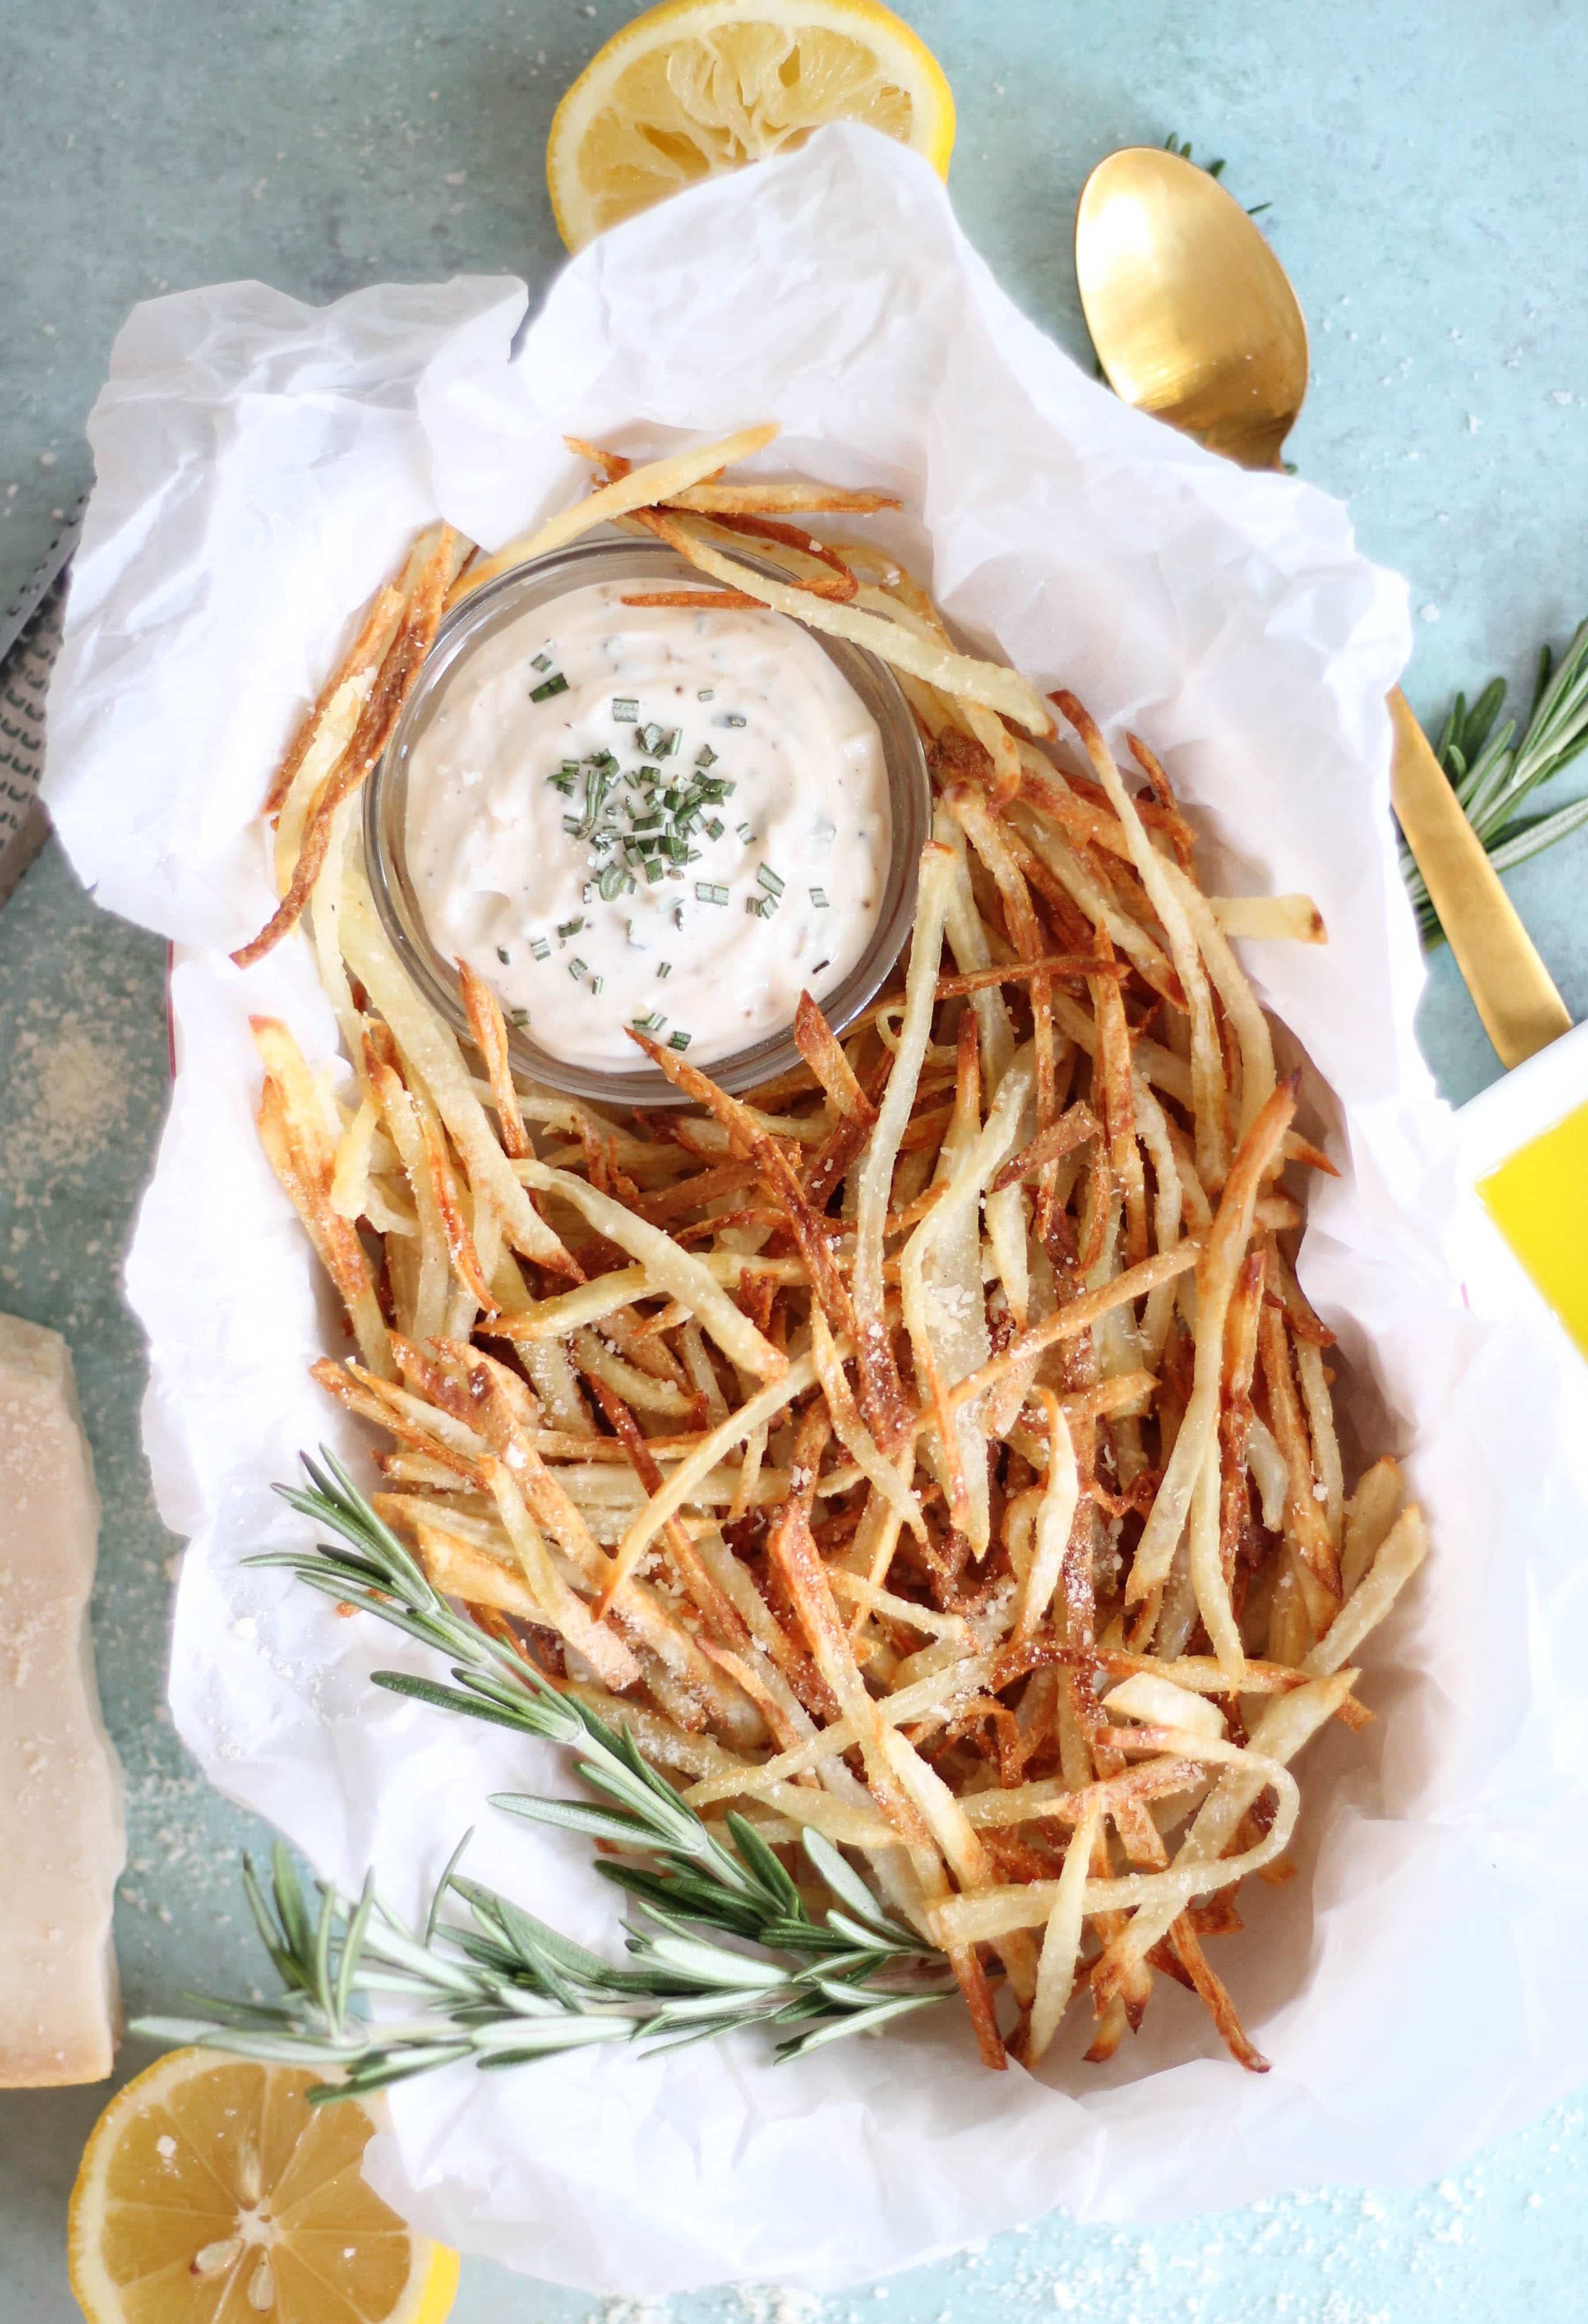 Parmesan Truffle Oven Fries With Rosemary Garlic Aioli,Is Cocoa Butter Vegan Friendly